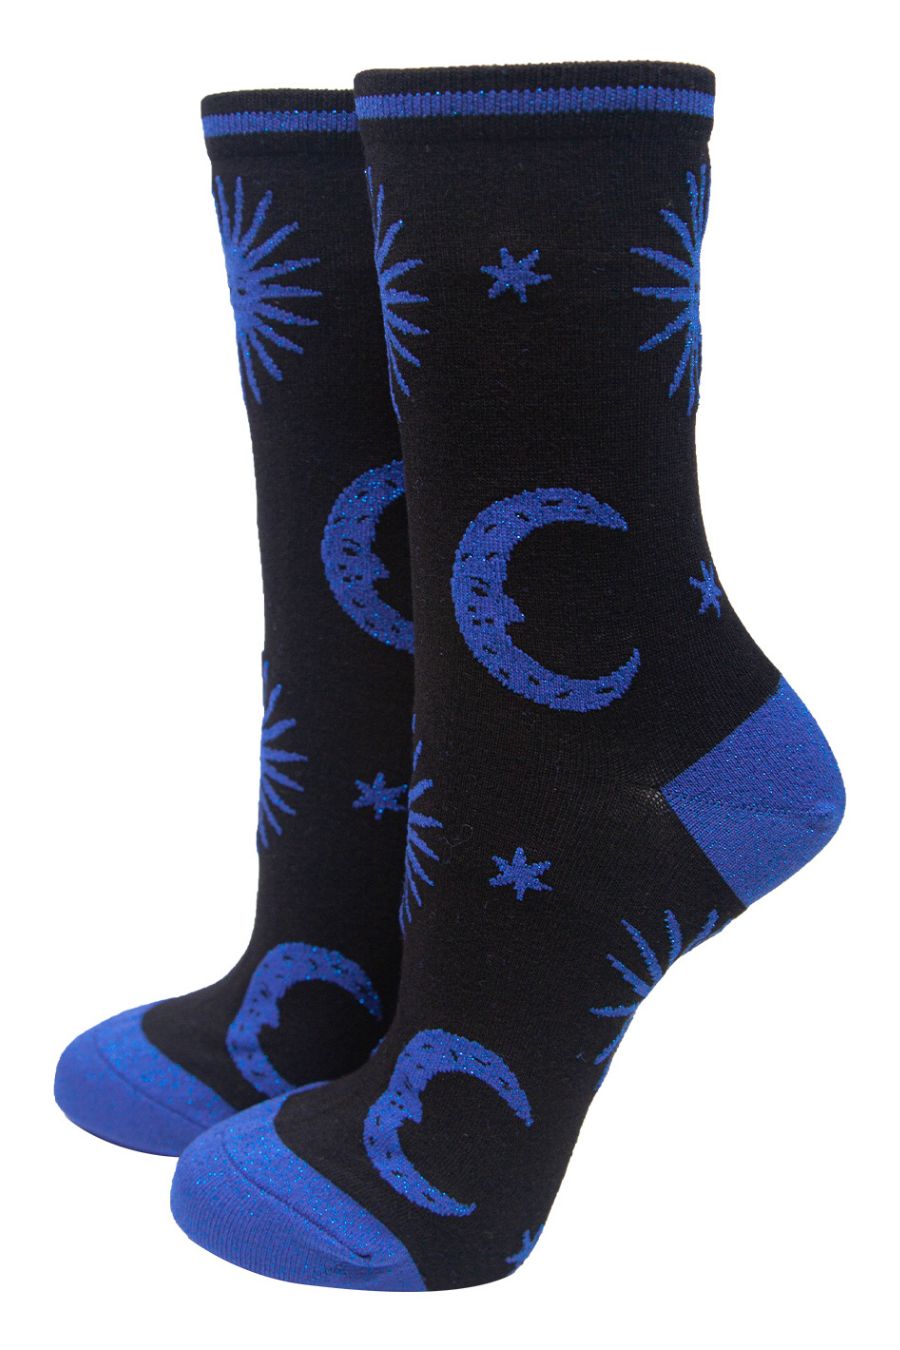 black ankle socks with blue glitter stars and moons